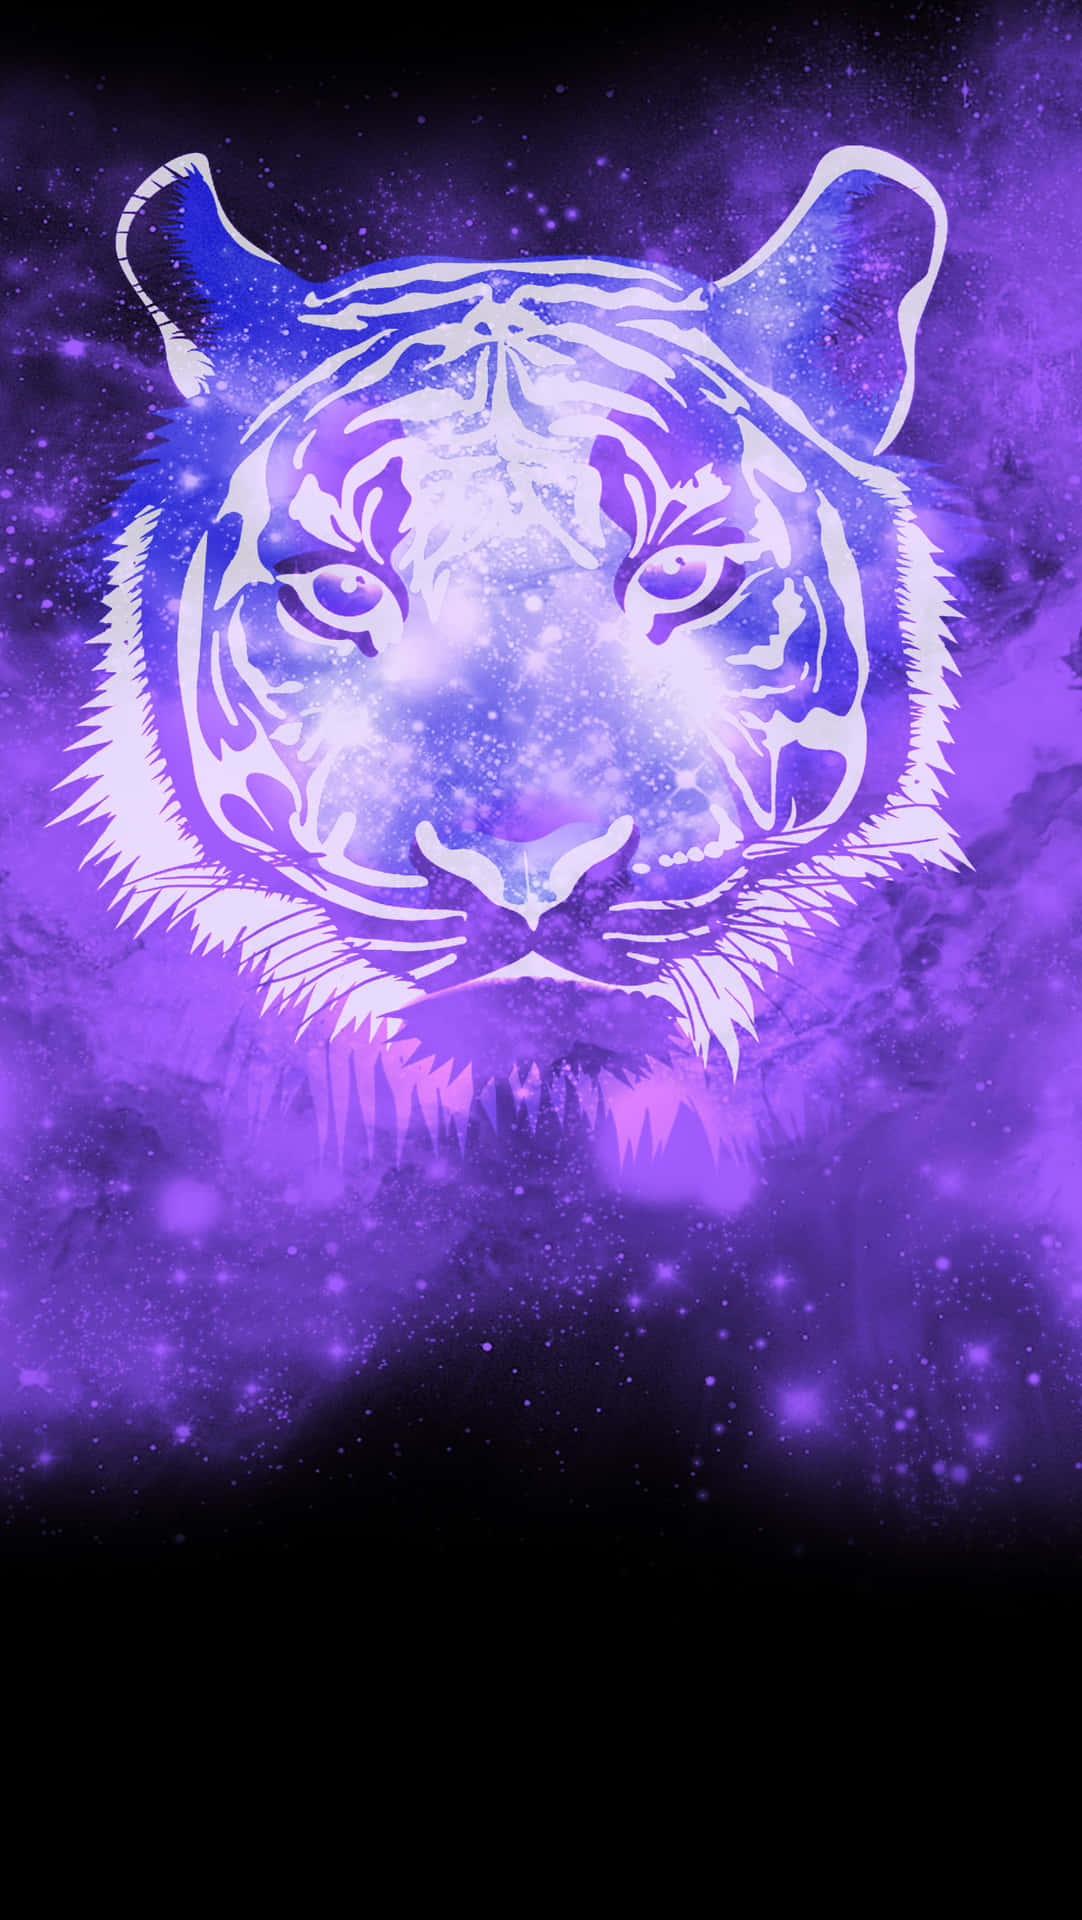 HD wallpaper African tiger animals head sky space illustration  decoration  Wallpaper Flare